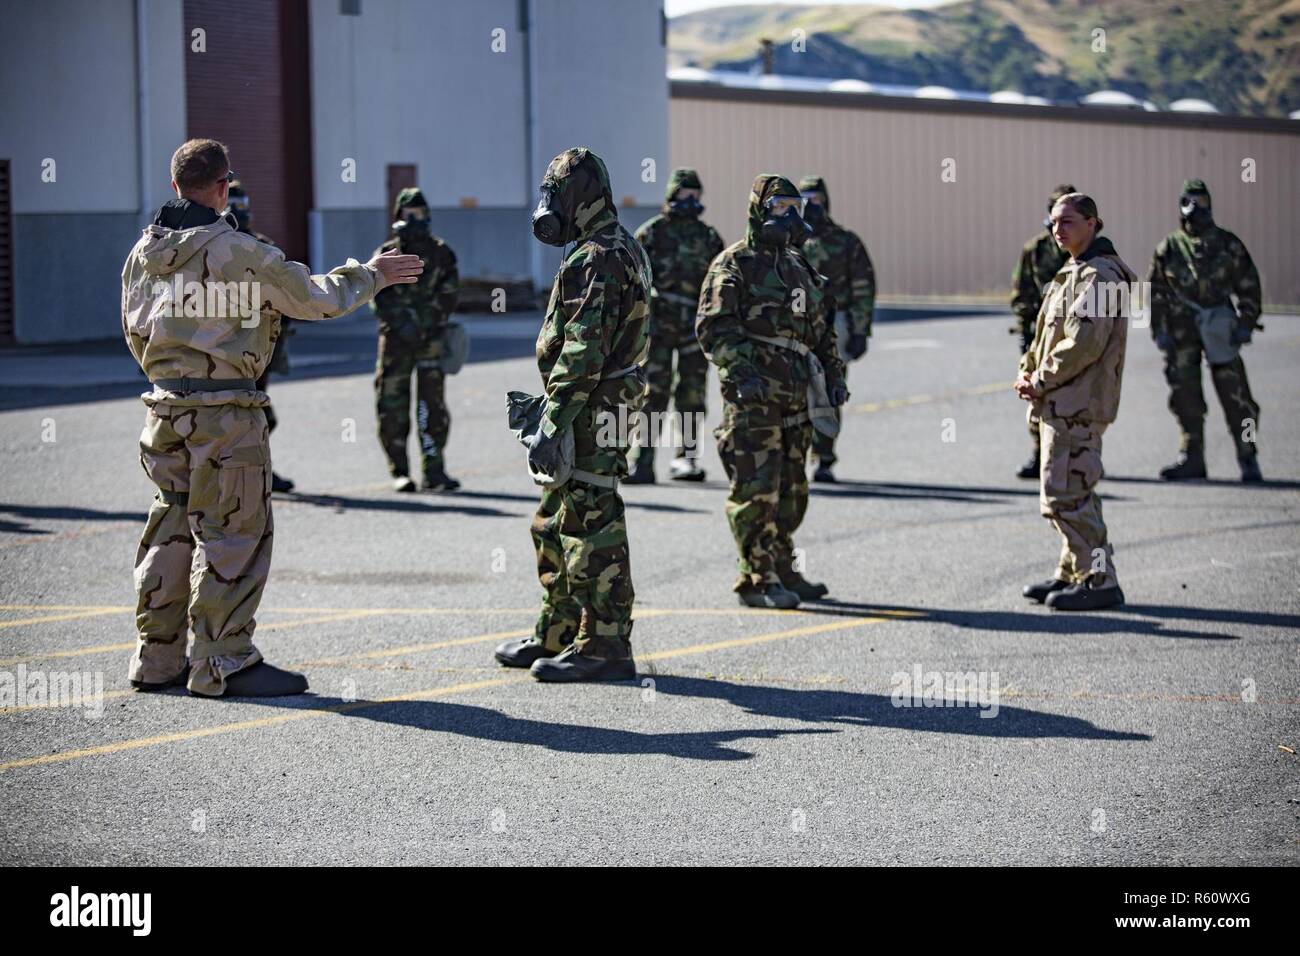 U.S. Marine Staff Sgt. Philip Barnes (left) instructs trainees in order to conduct the Reconnaissance, Surveillance and Decontamination Training aboard Marine Corps Base Camp Pendleton, Calif., April 26, 2017. Barnes goes over different safety precautions, prior to the trainees separating into their different training groups. The purpose of this training is to accomplish missions within a chemical, biological, radiological and nuclear environment.  Barnes is the current CBRN chief for 1st Maintenance Battalion, 1st Marine Logistics Group. Stock Photo